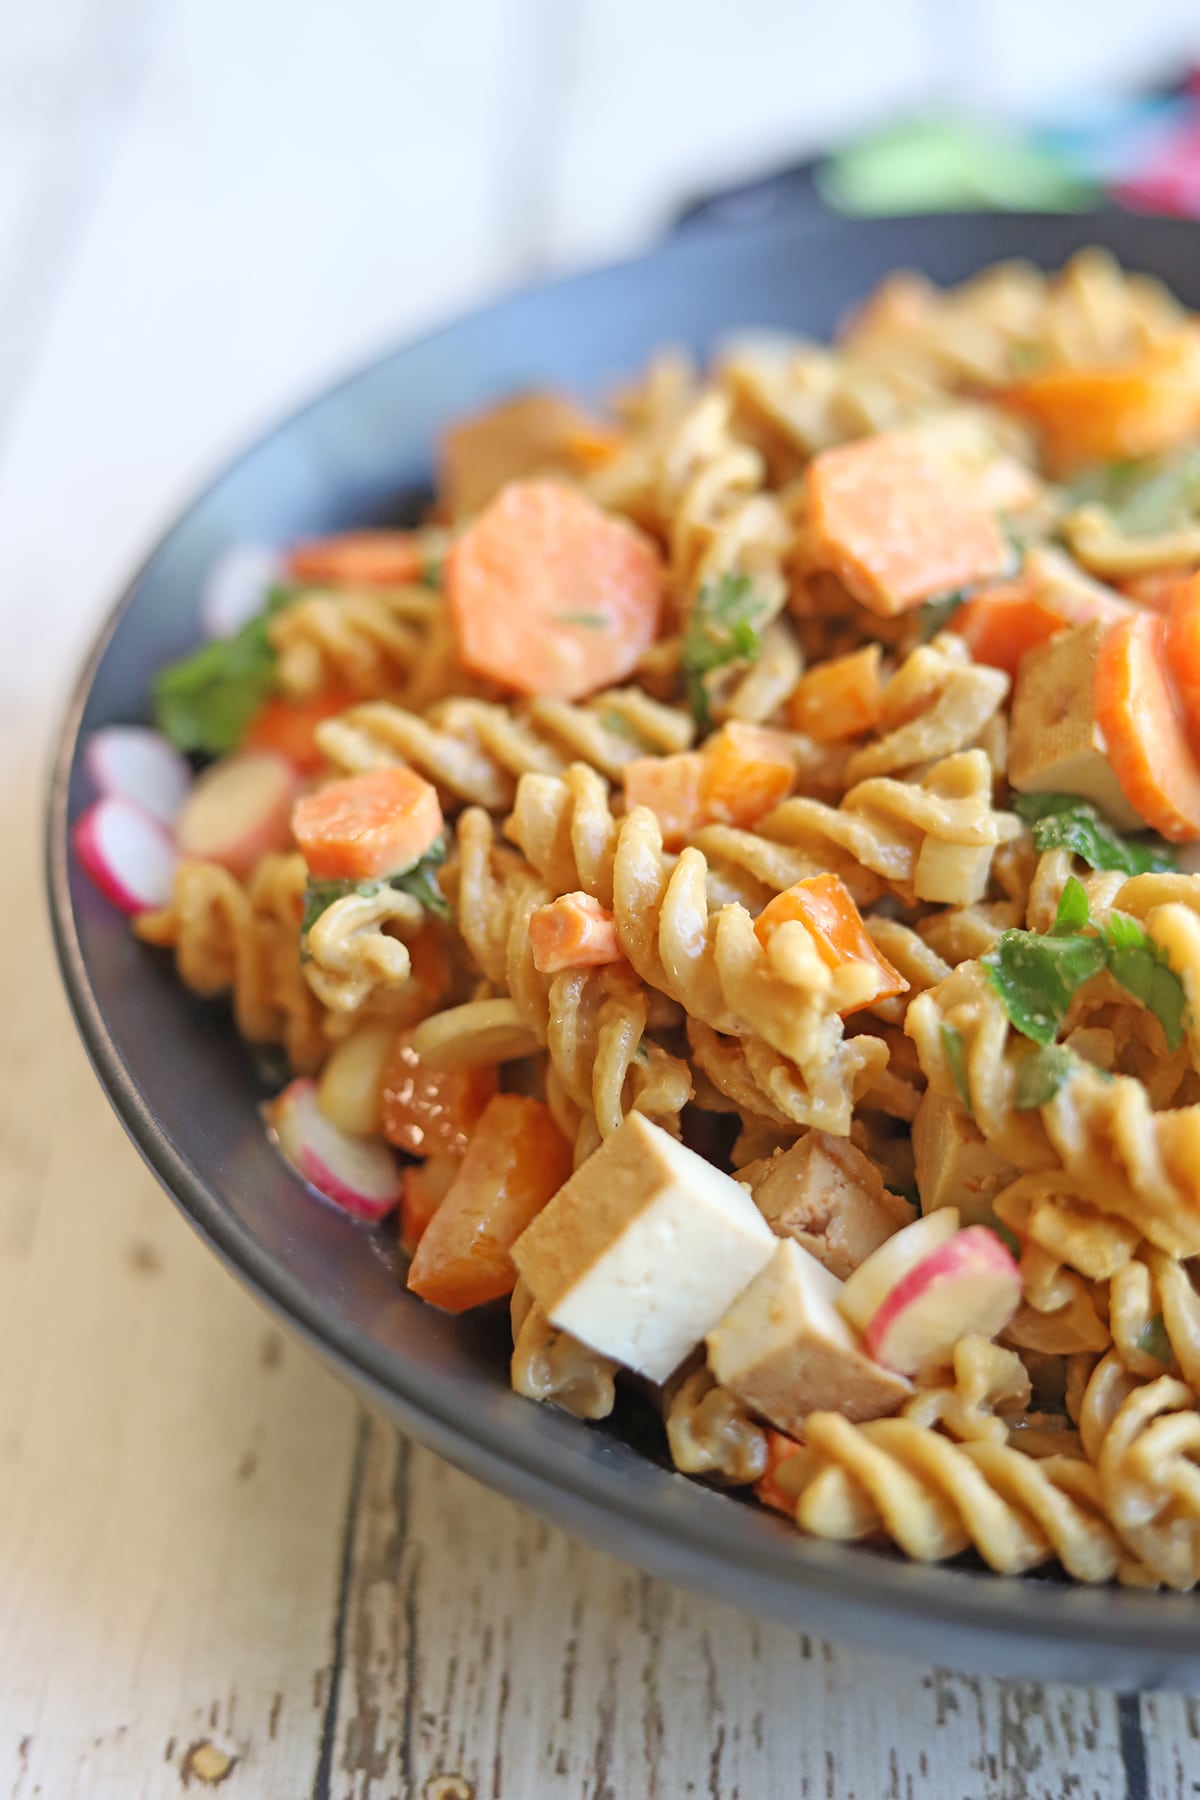 Peanut noodles with vegetables and tofu in bowl.